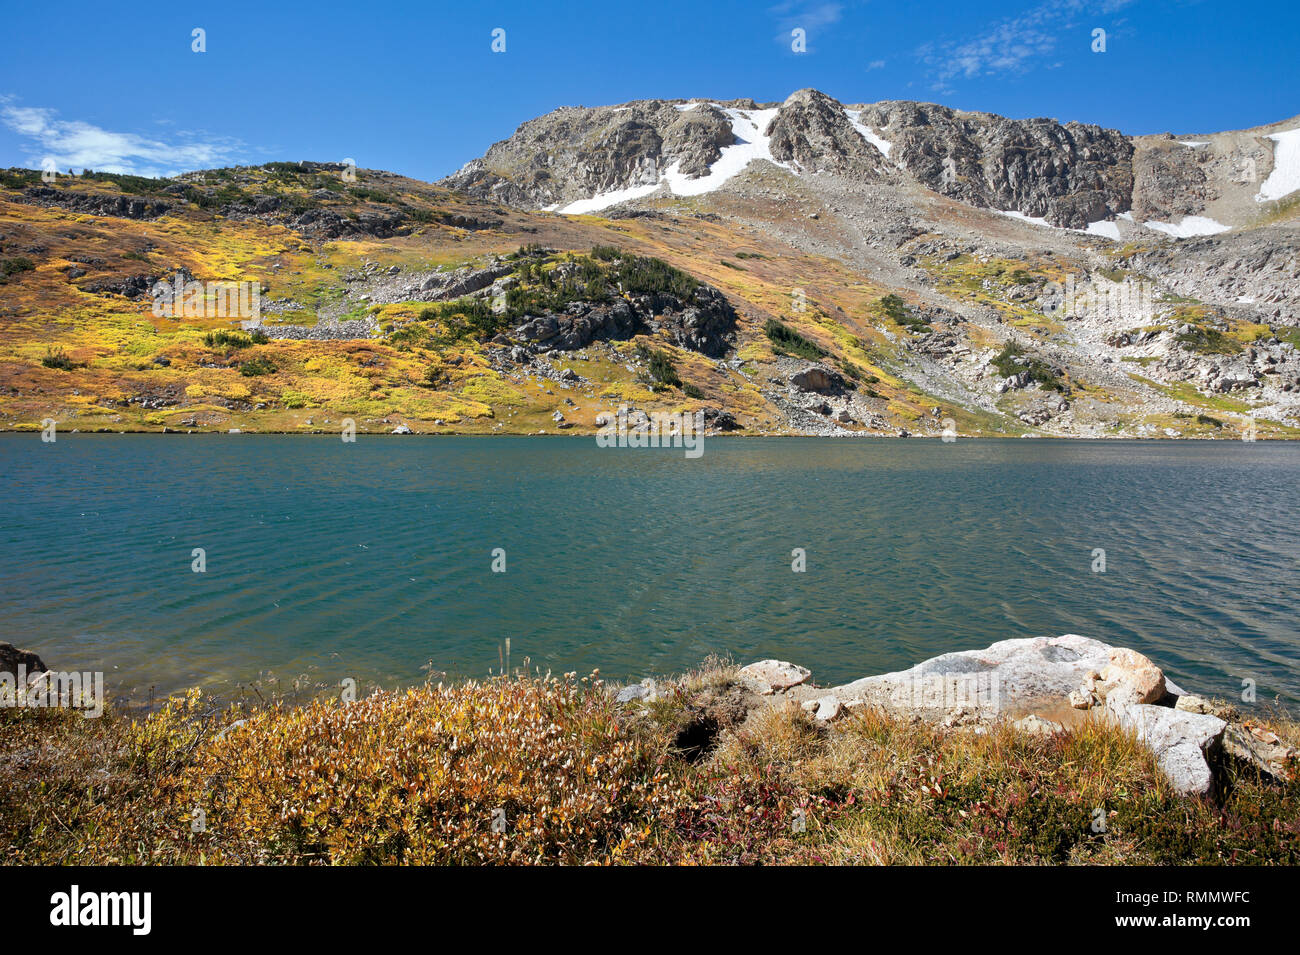 WYOMING - Fall color along the shore and on the hillsides around Gardner Lake in the Beartooth Mountains on the Beartooth National Scenic Trail. Stock Photo